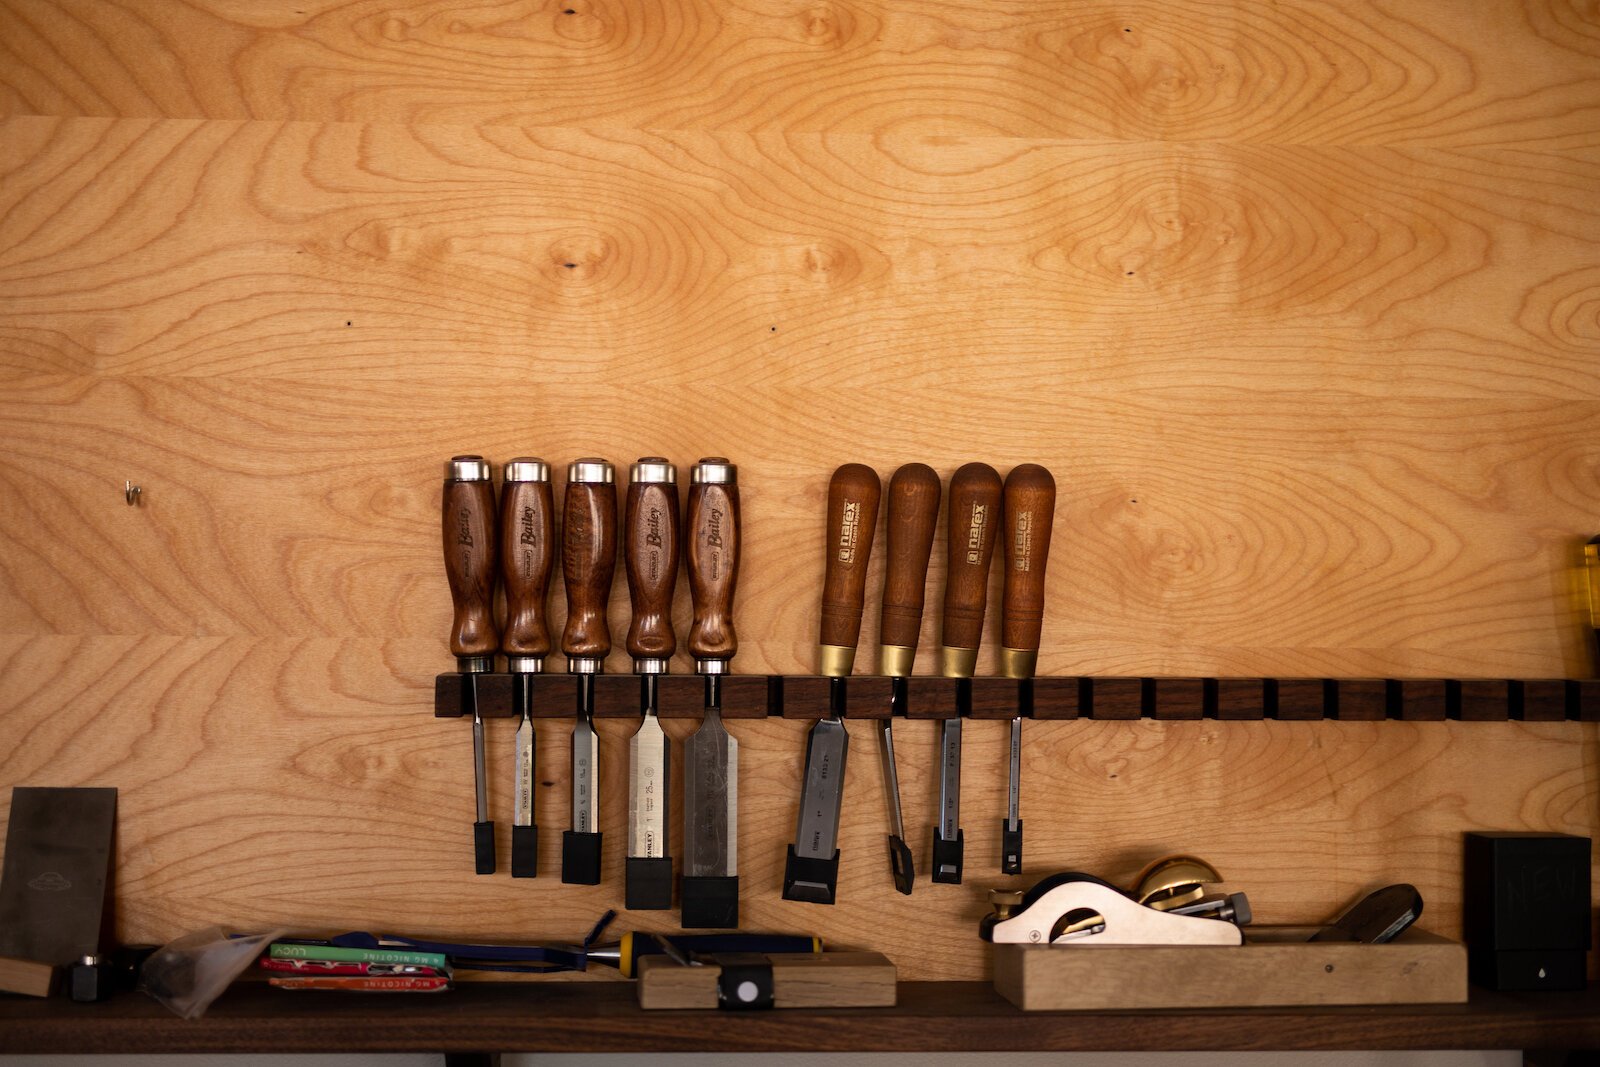 Woodworking tools at Big Tooth Co., a sustainable Fort Wayne company that makes quality, heirloom furniture by hand, using traditional and modern techniques.